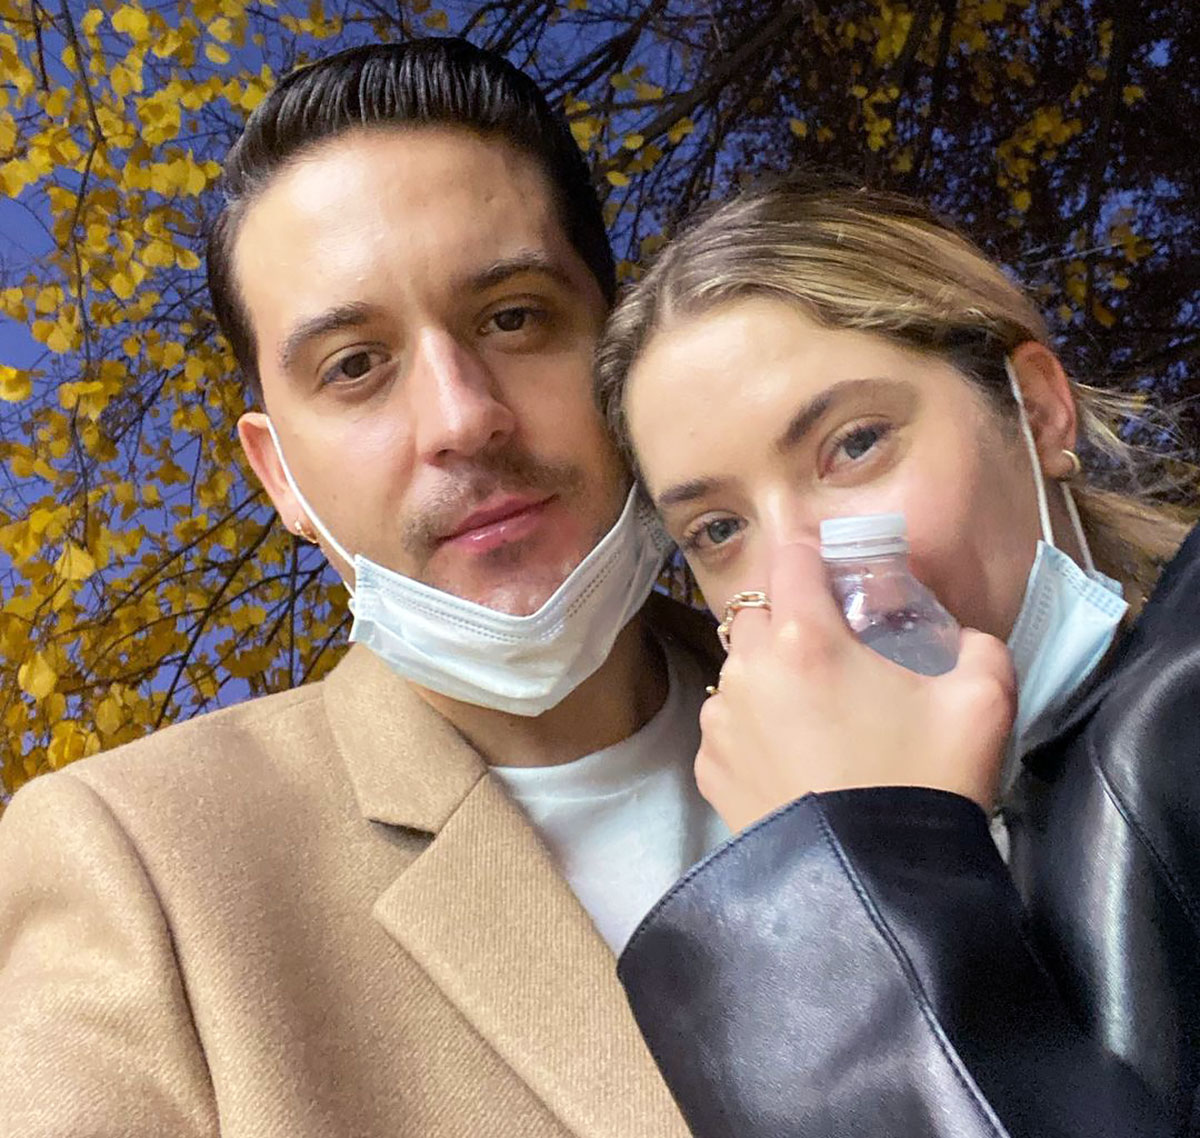 4 reasons why G-Eazy is going to blow up/turn up/steal your girl